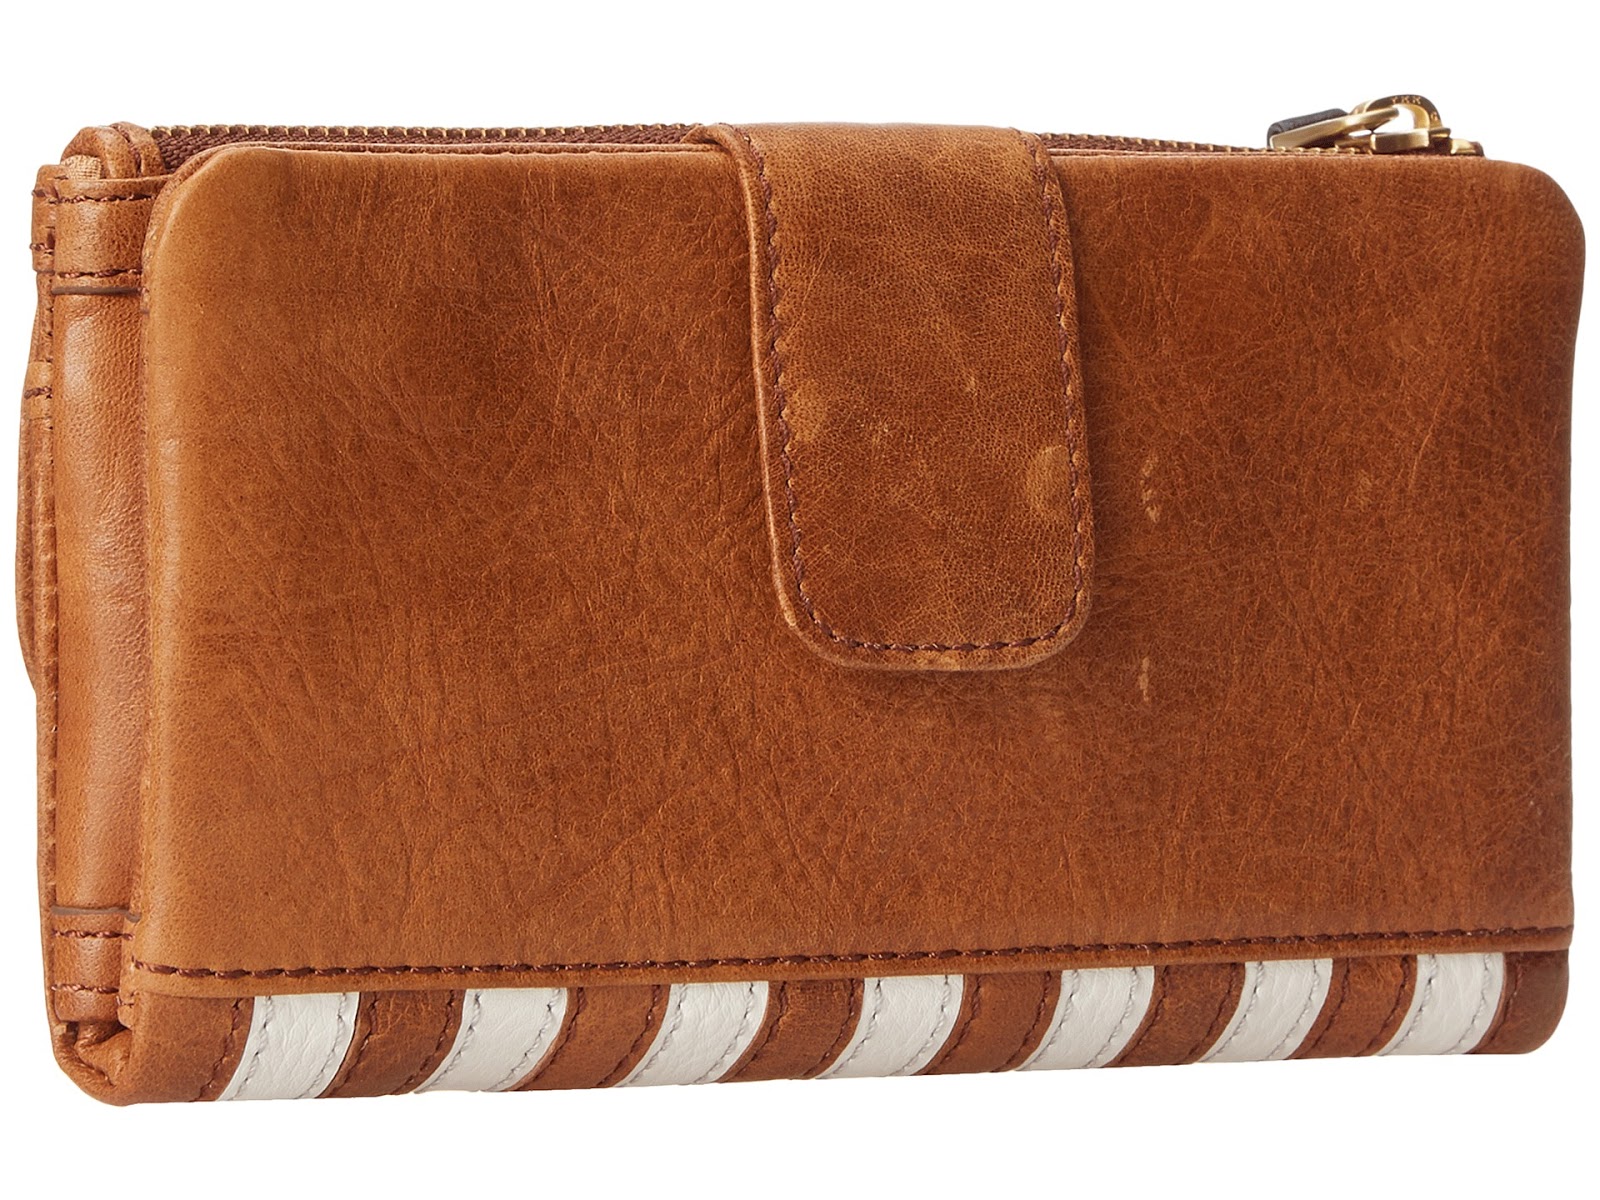 USA Boutique: FOSSIL Emory Leather Clutch Wallet - Brown Multi